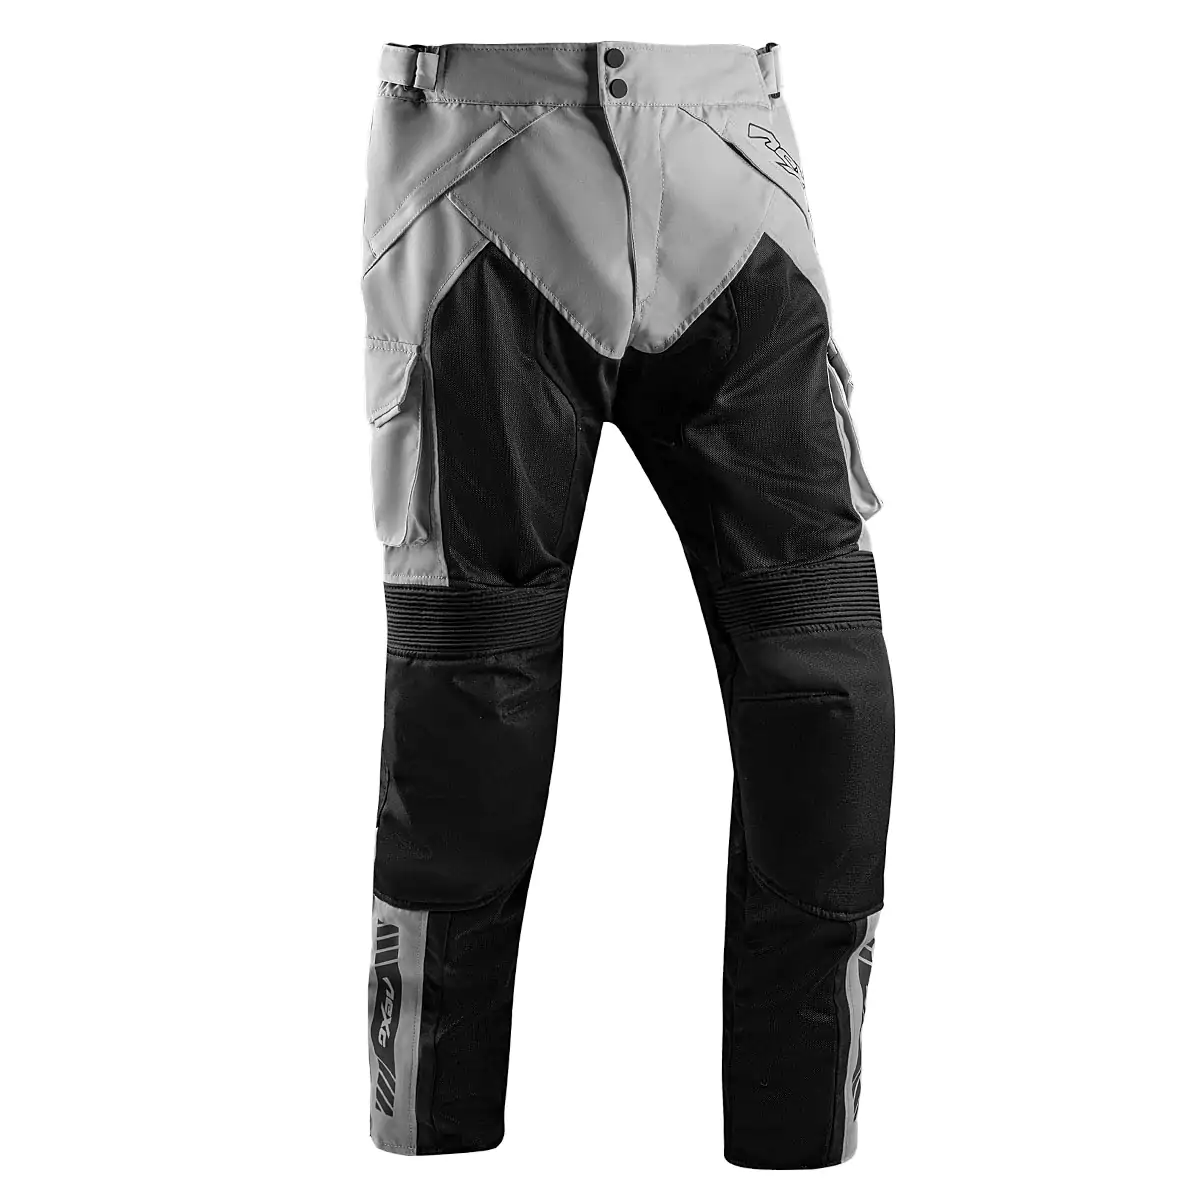 Black and grey motorcycle textile pants with protective padding and adjustable straps.